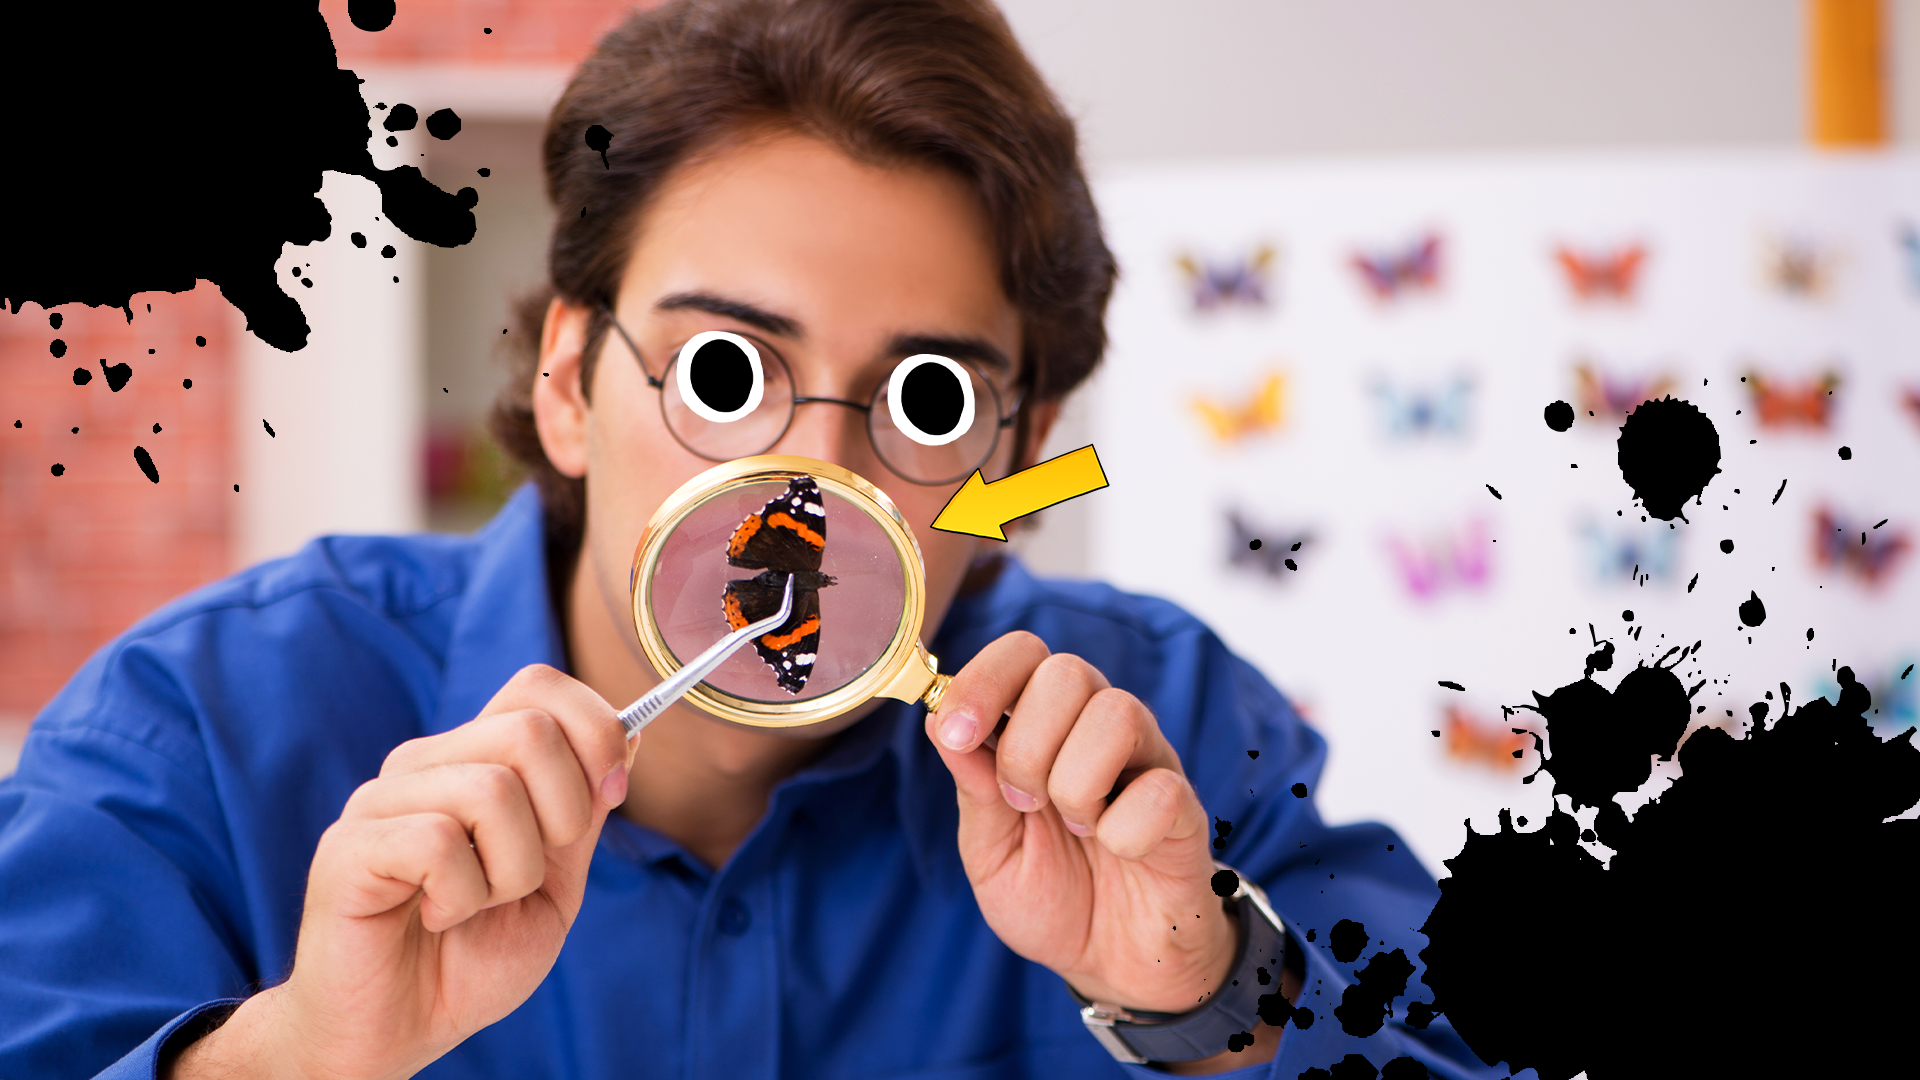 Man looking at butterfly through magnifying glass with arrow and black splatters